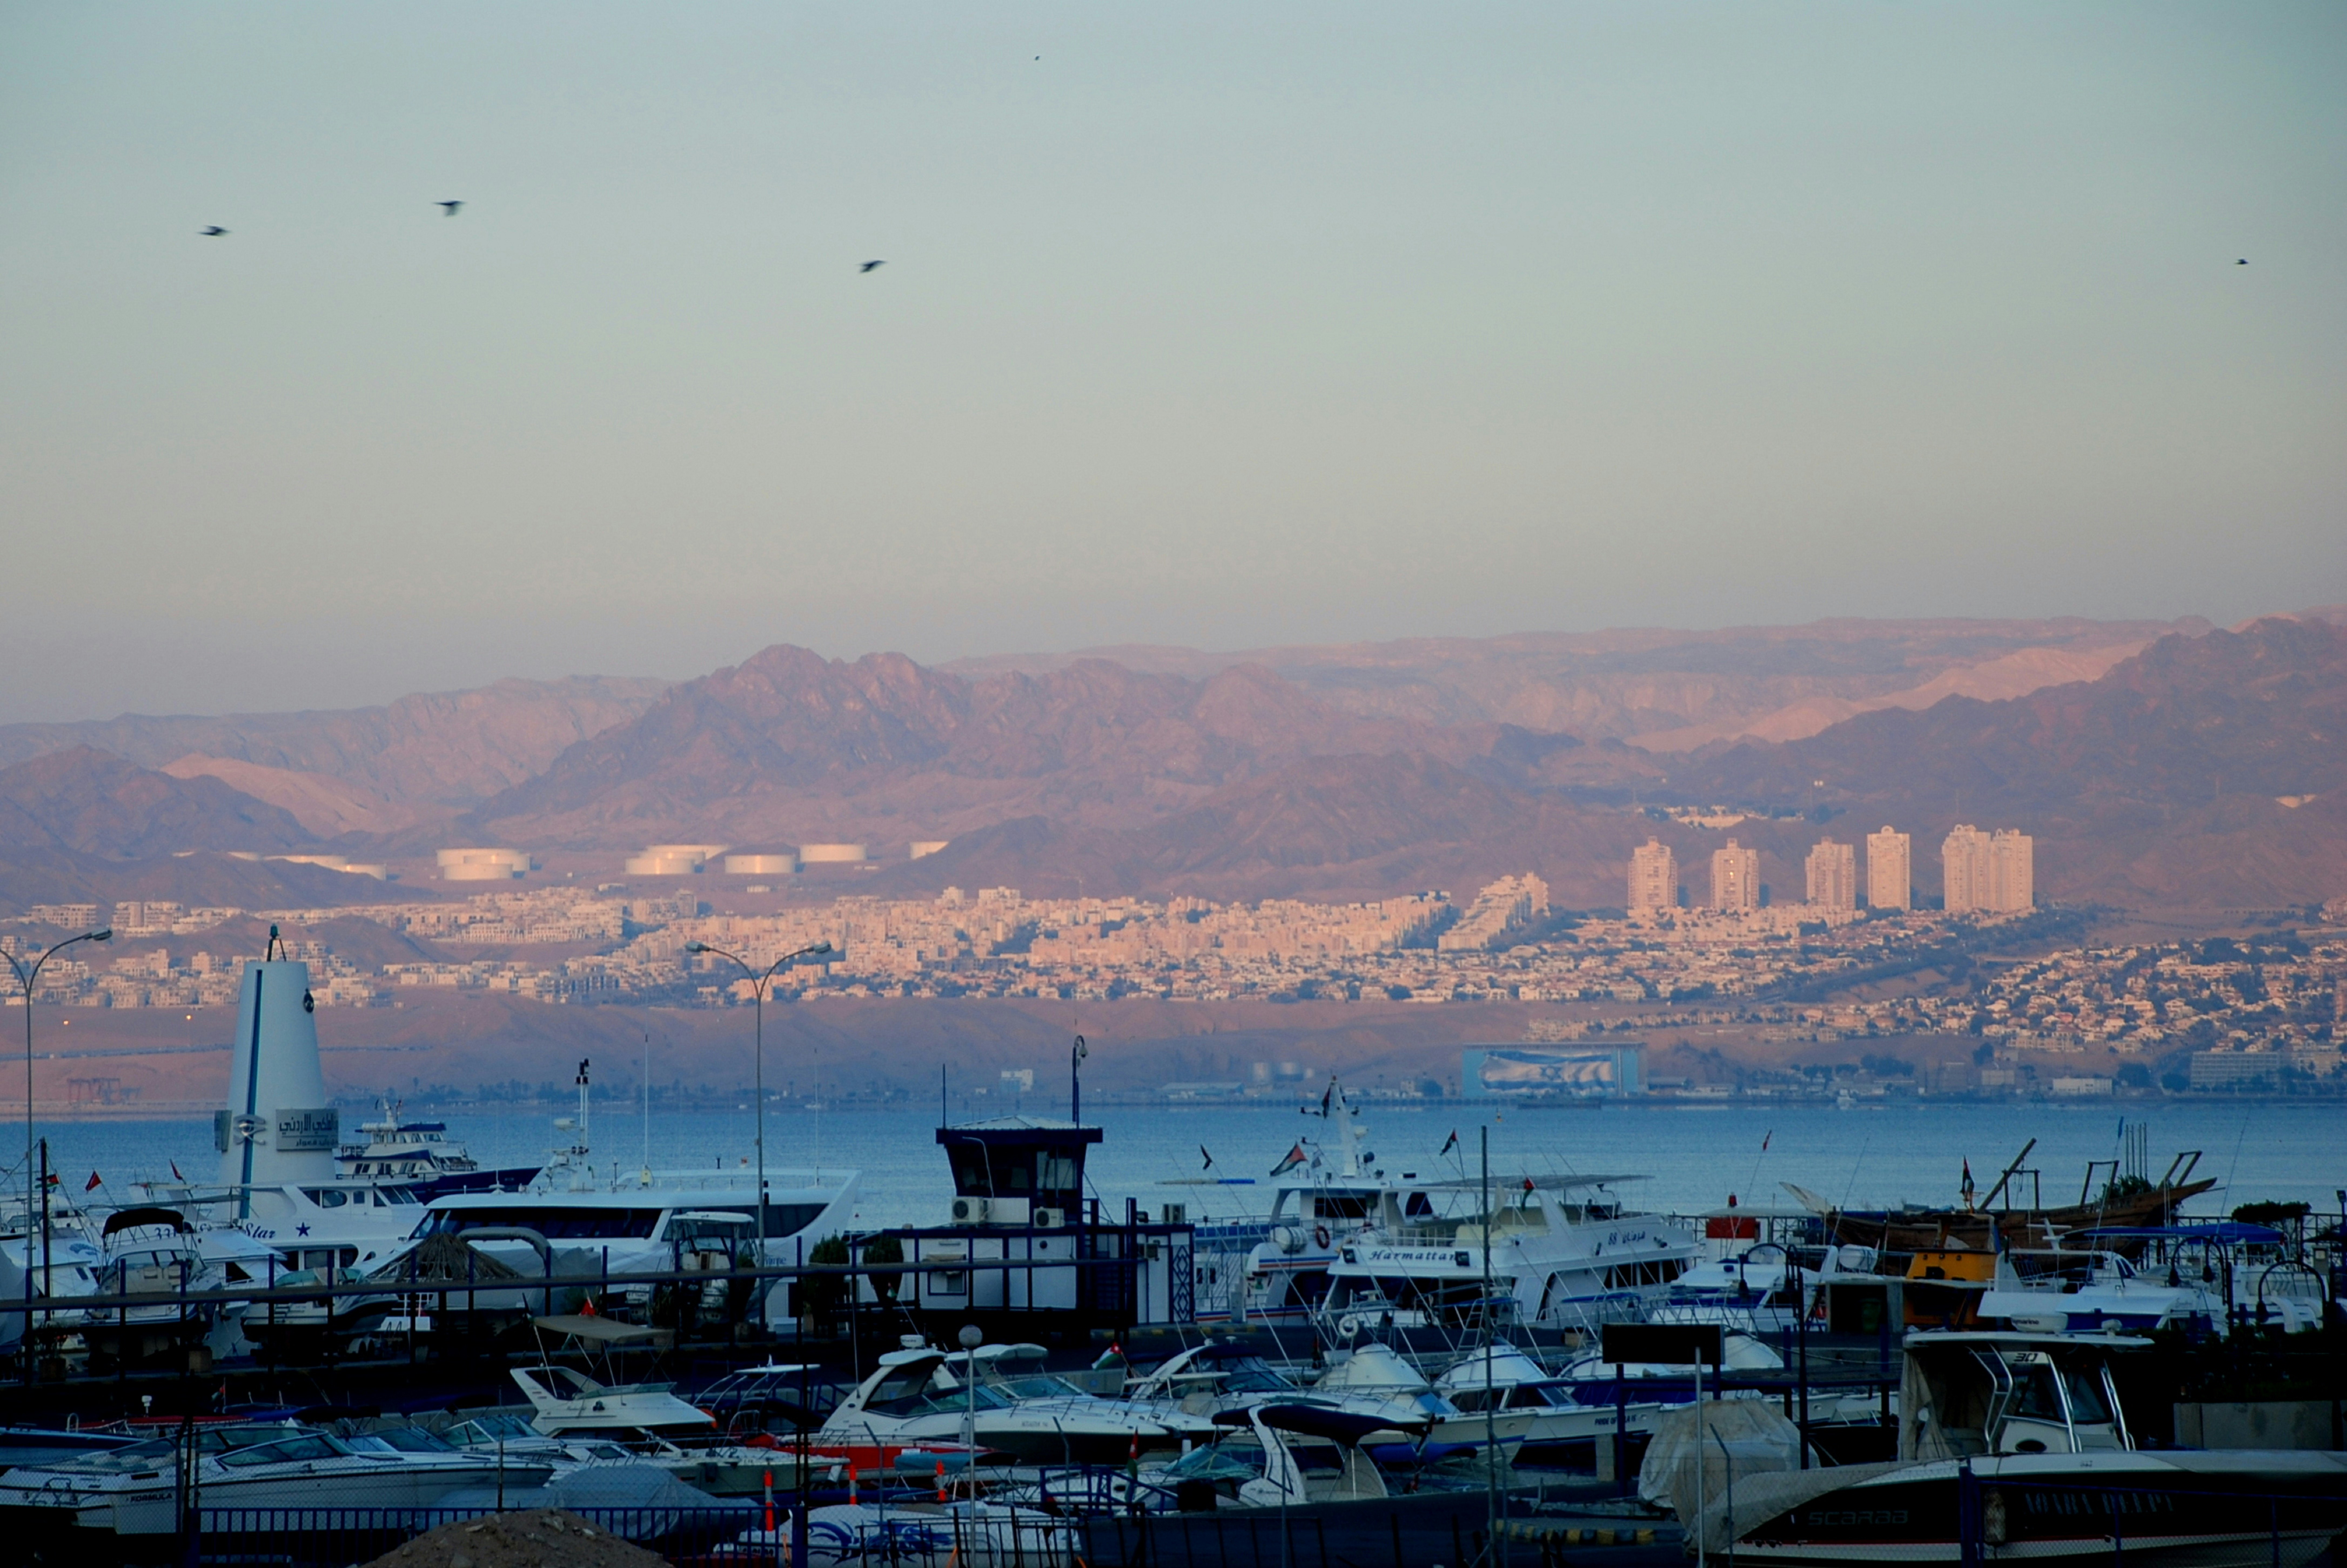 A panoramic shot of the Aqaba shoreline In Jordan. The Red Sea appears as a vibrant blue colour with the red, rolling mountains in the background.